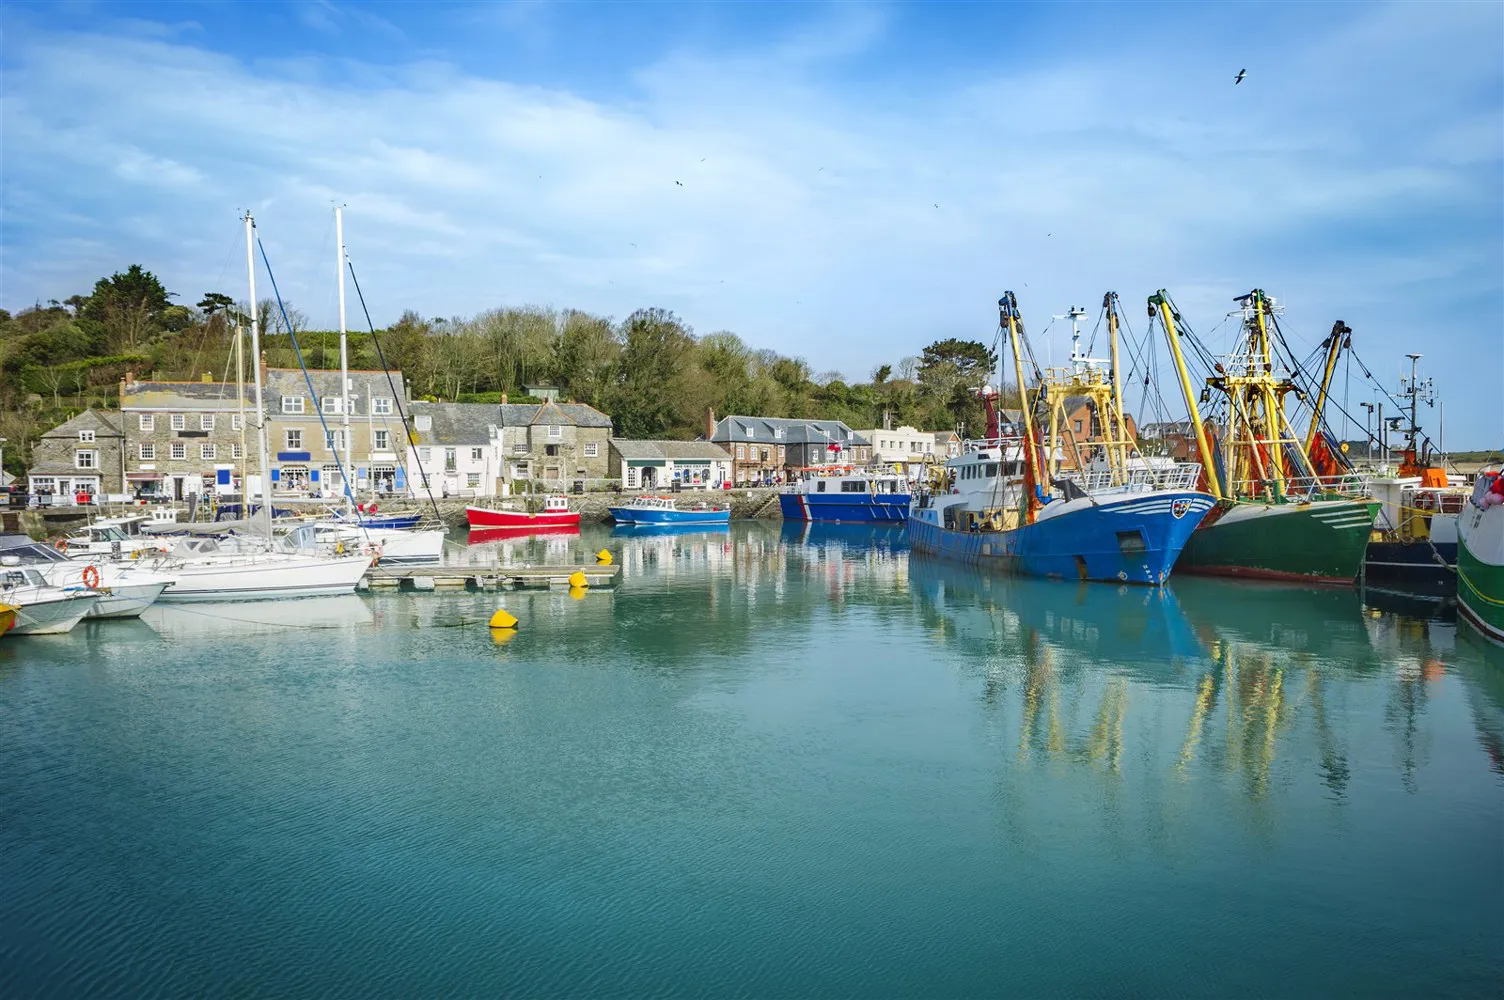 Padstow, Cornwall